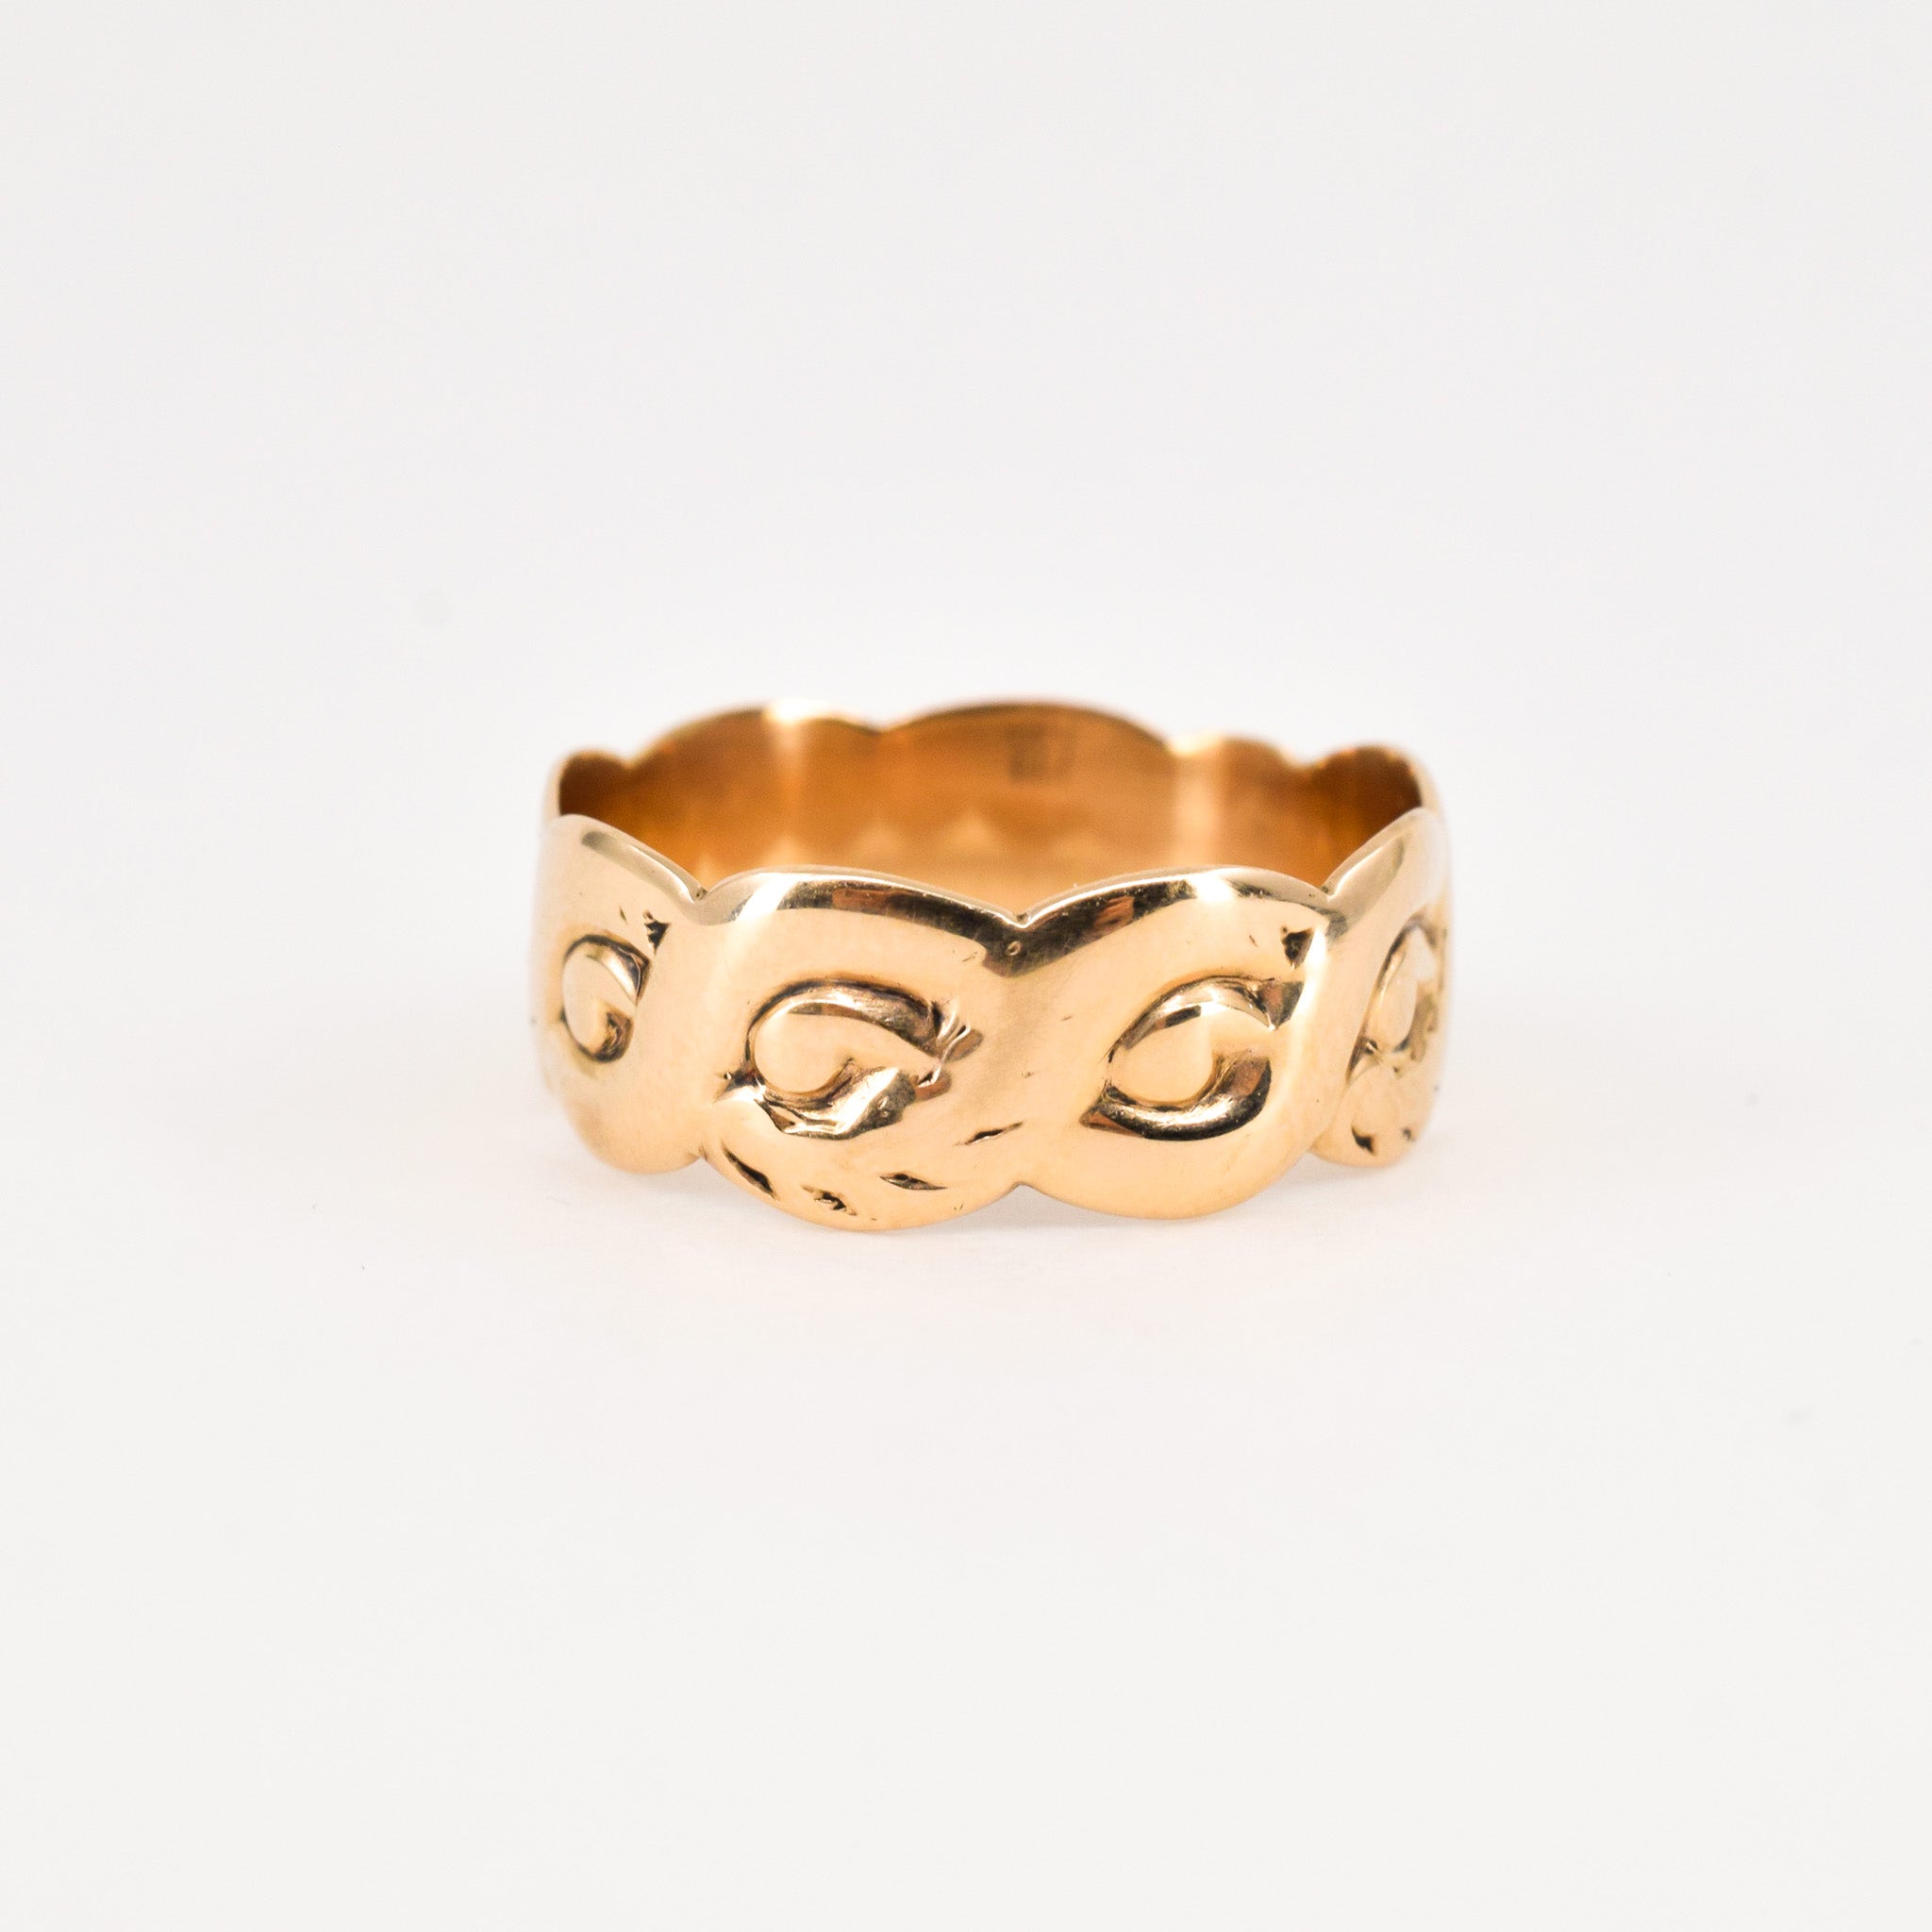 antique gold ring, folklor, vintage and antique jewelry canada